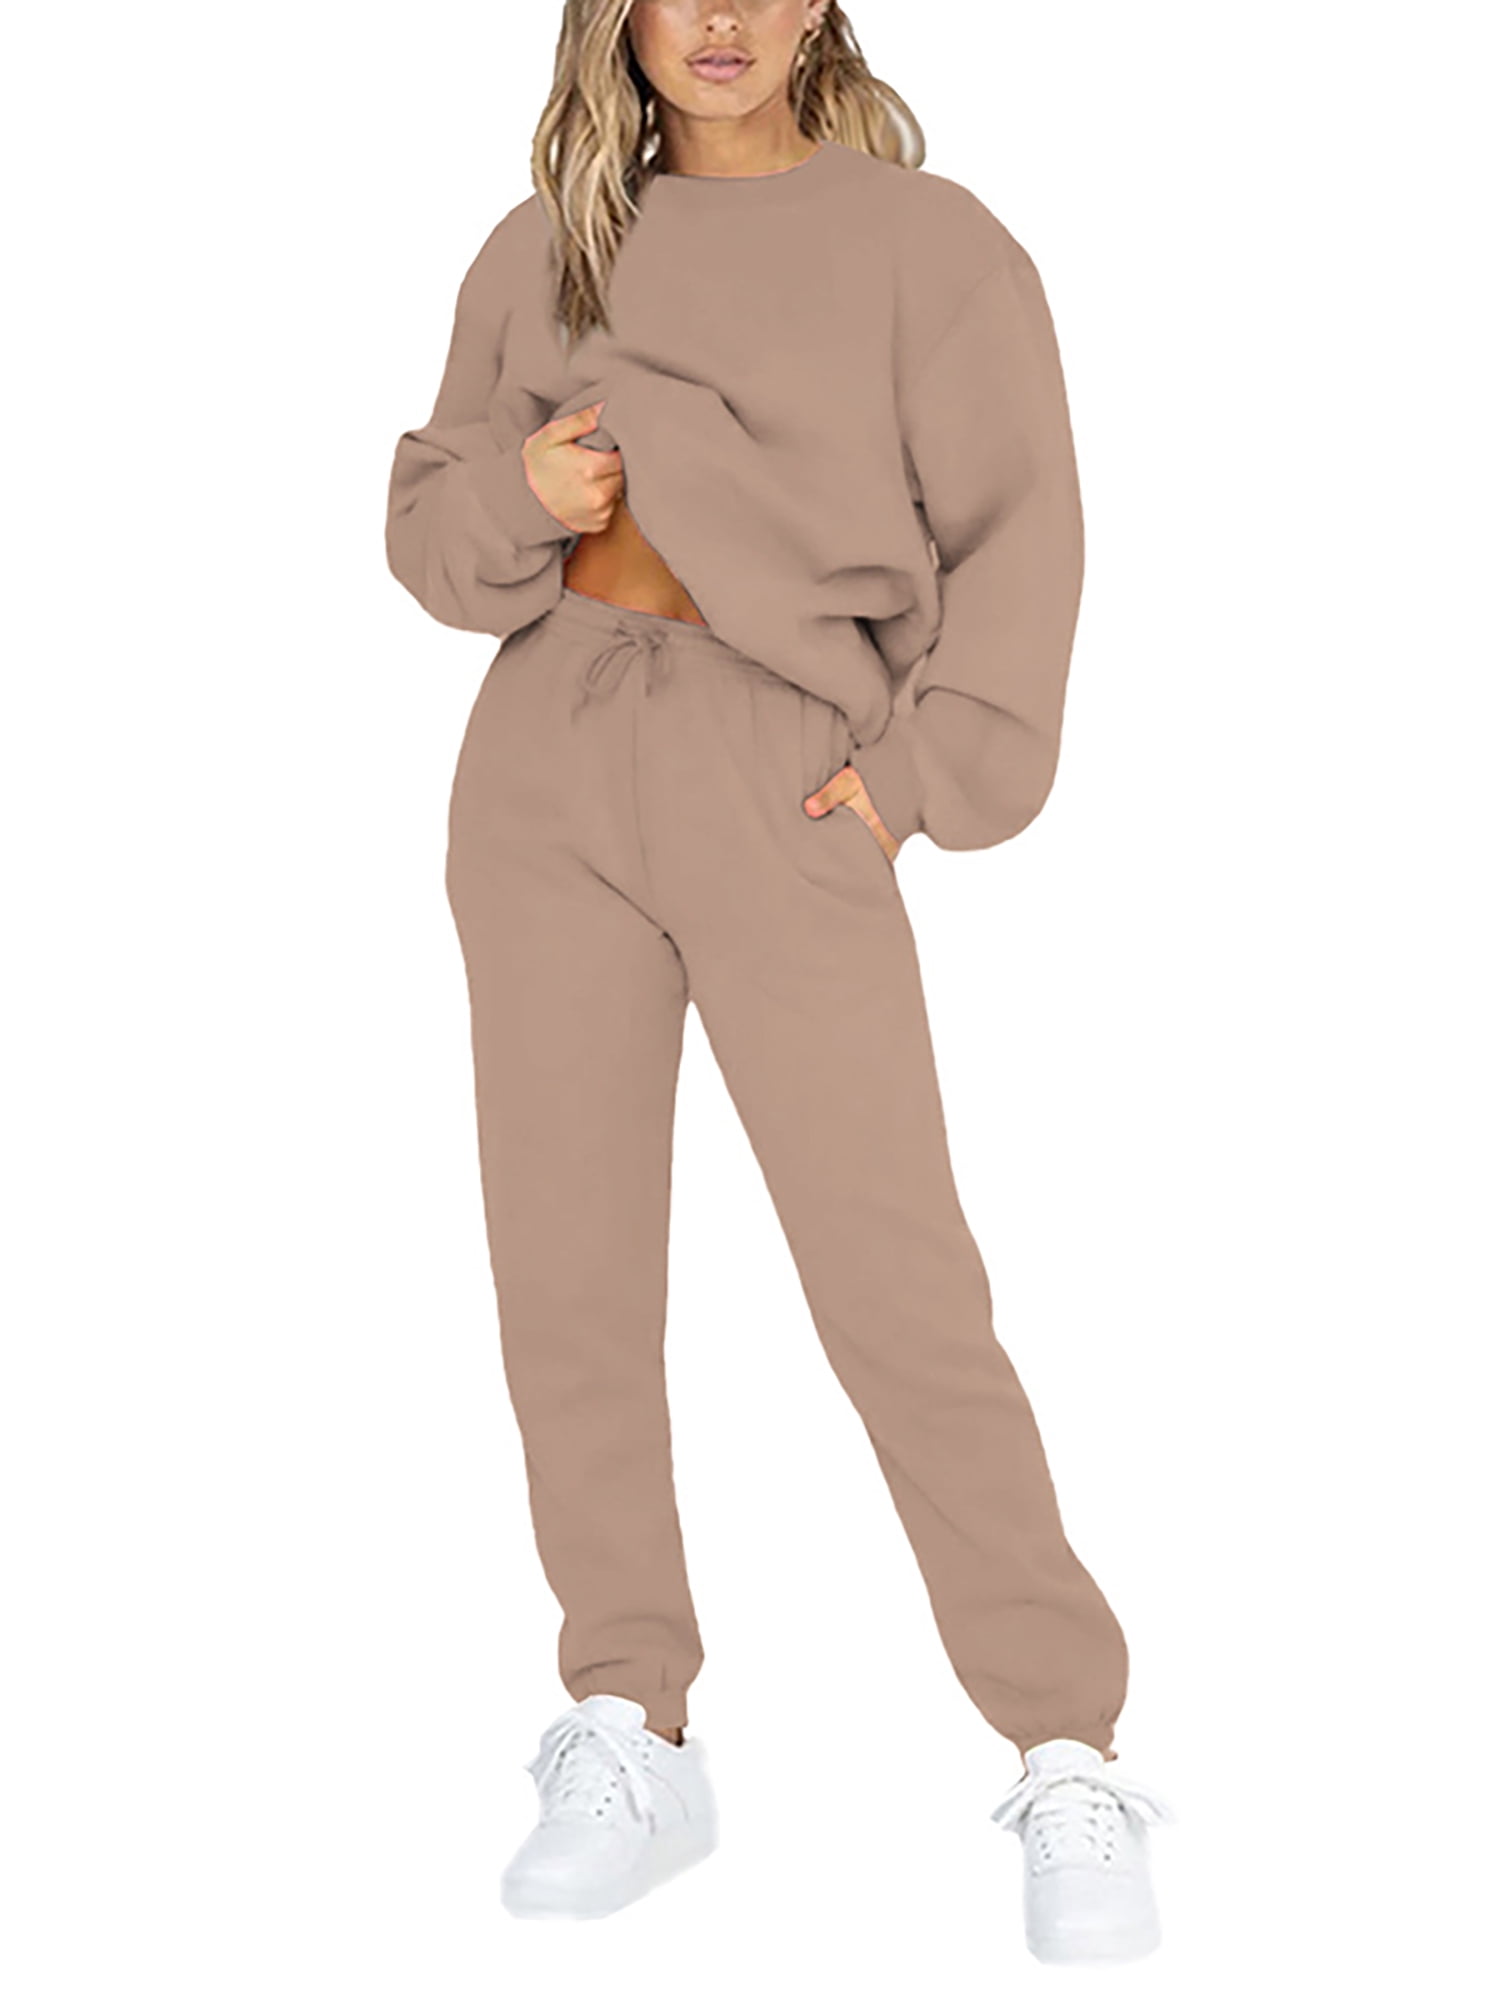 Capreze Long Sleeve Sweatsuits For Womens Solid Color Casual Lounge Sets  Long Sleeve Activewear Joggers Outfits Khaki M